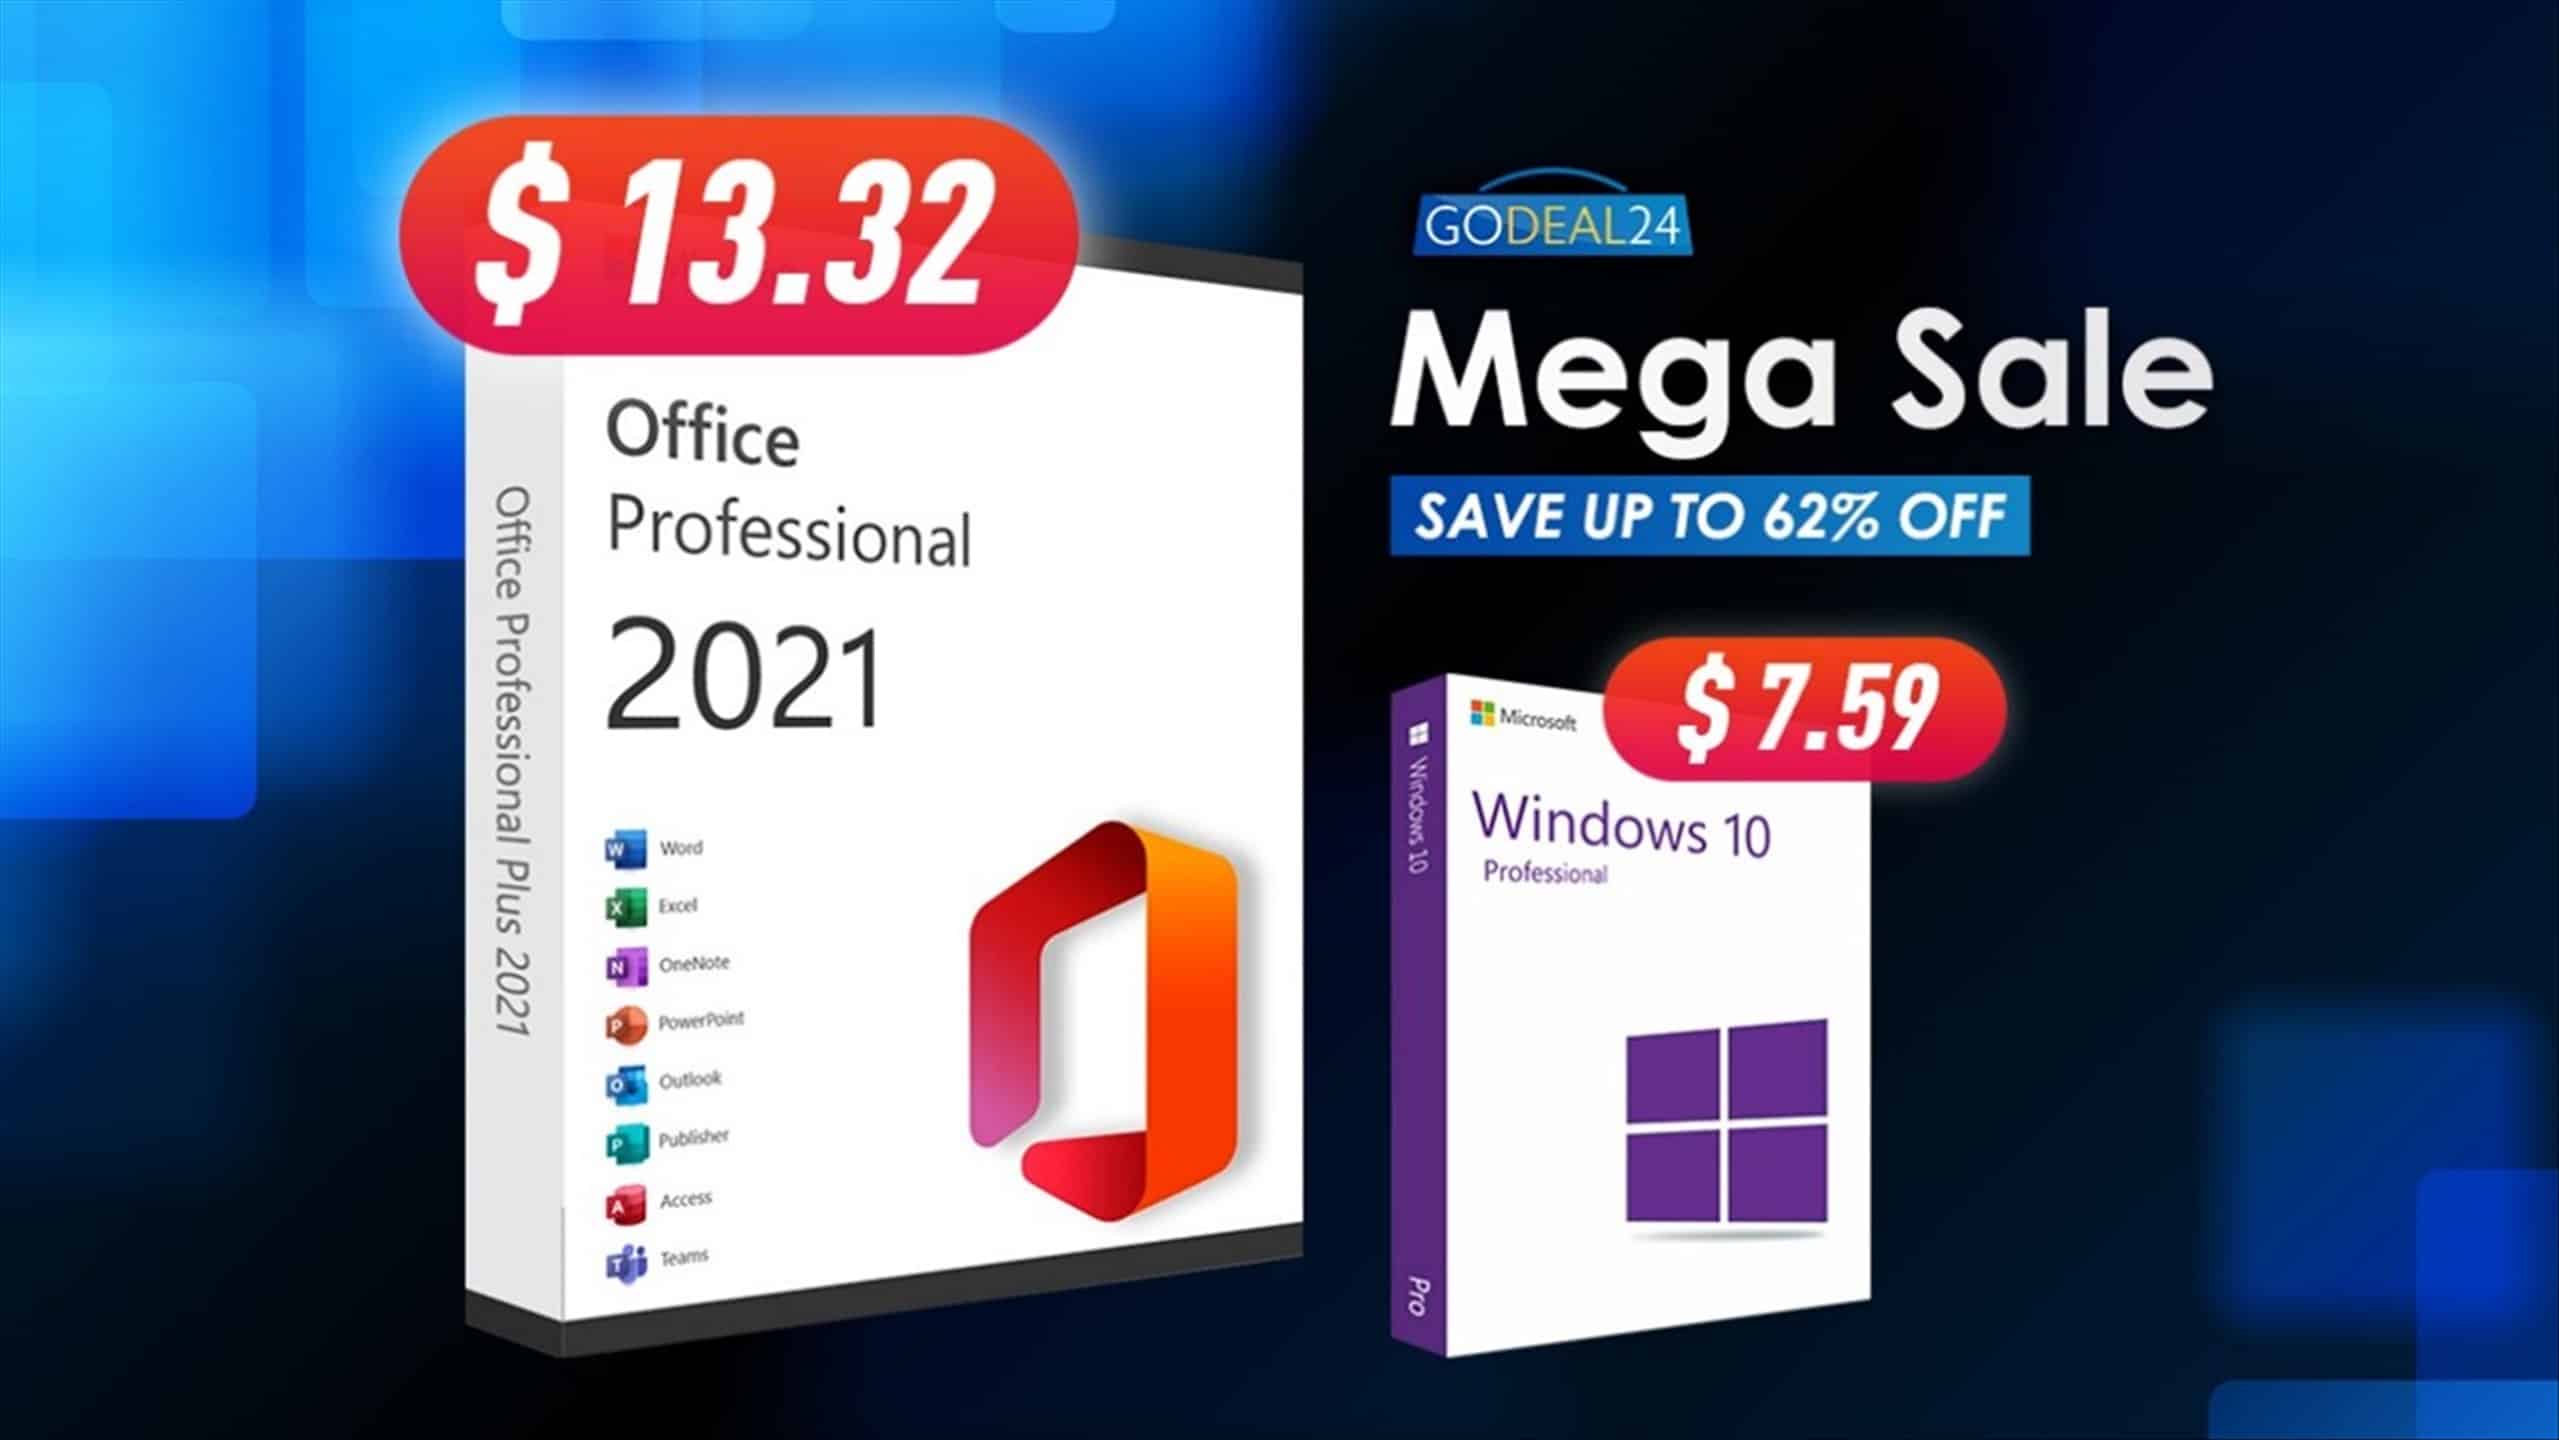 Buy Microsoft Office 2021 licenses from $13.32 with Godeal24 Software Sale!